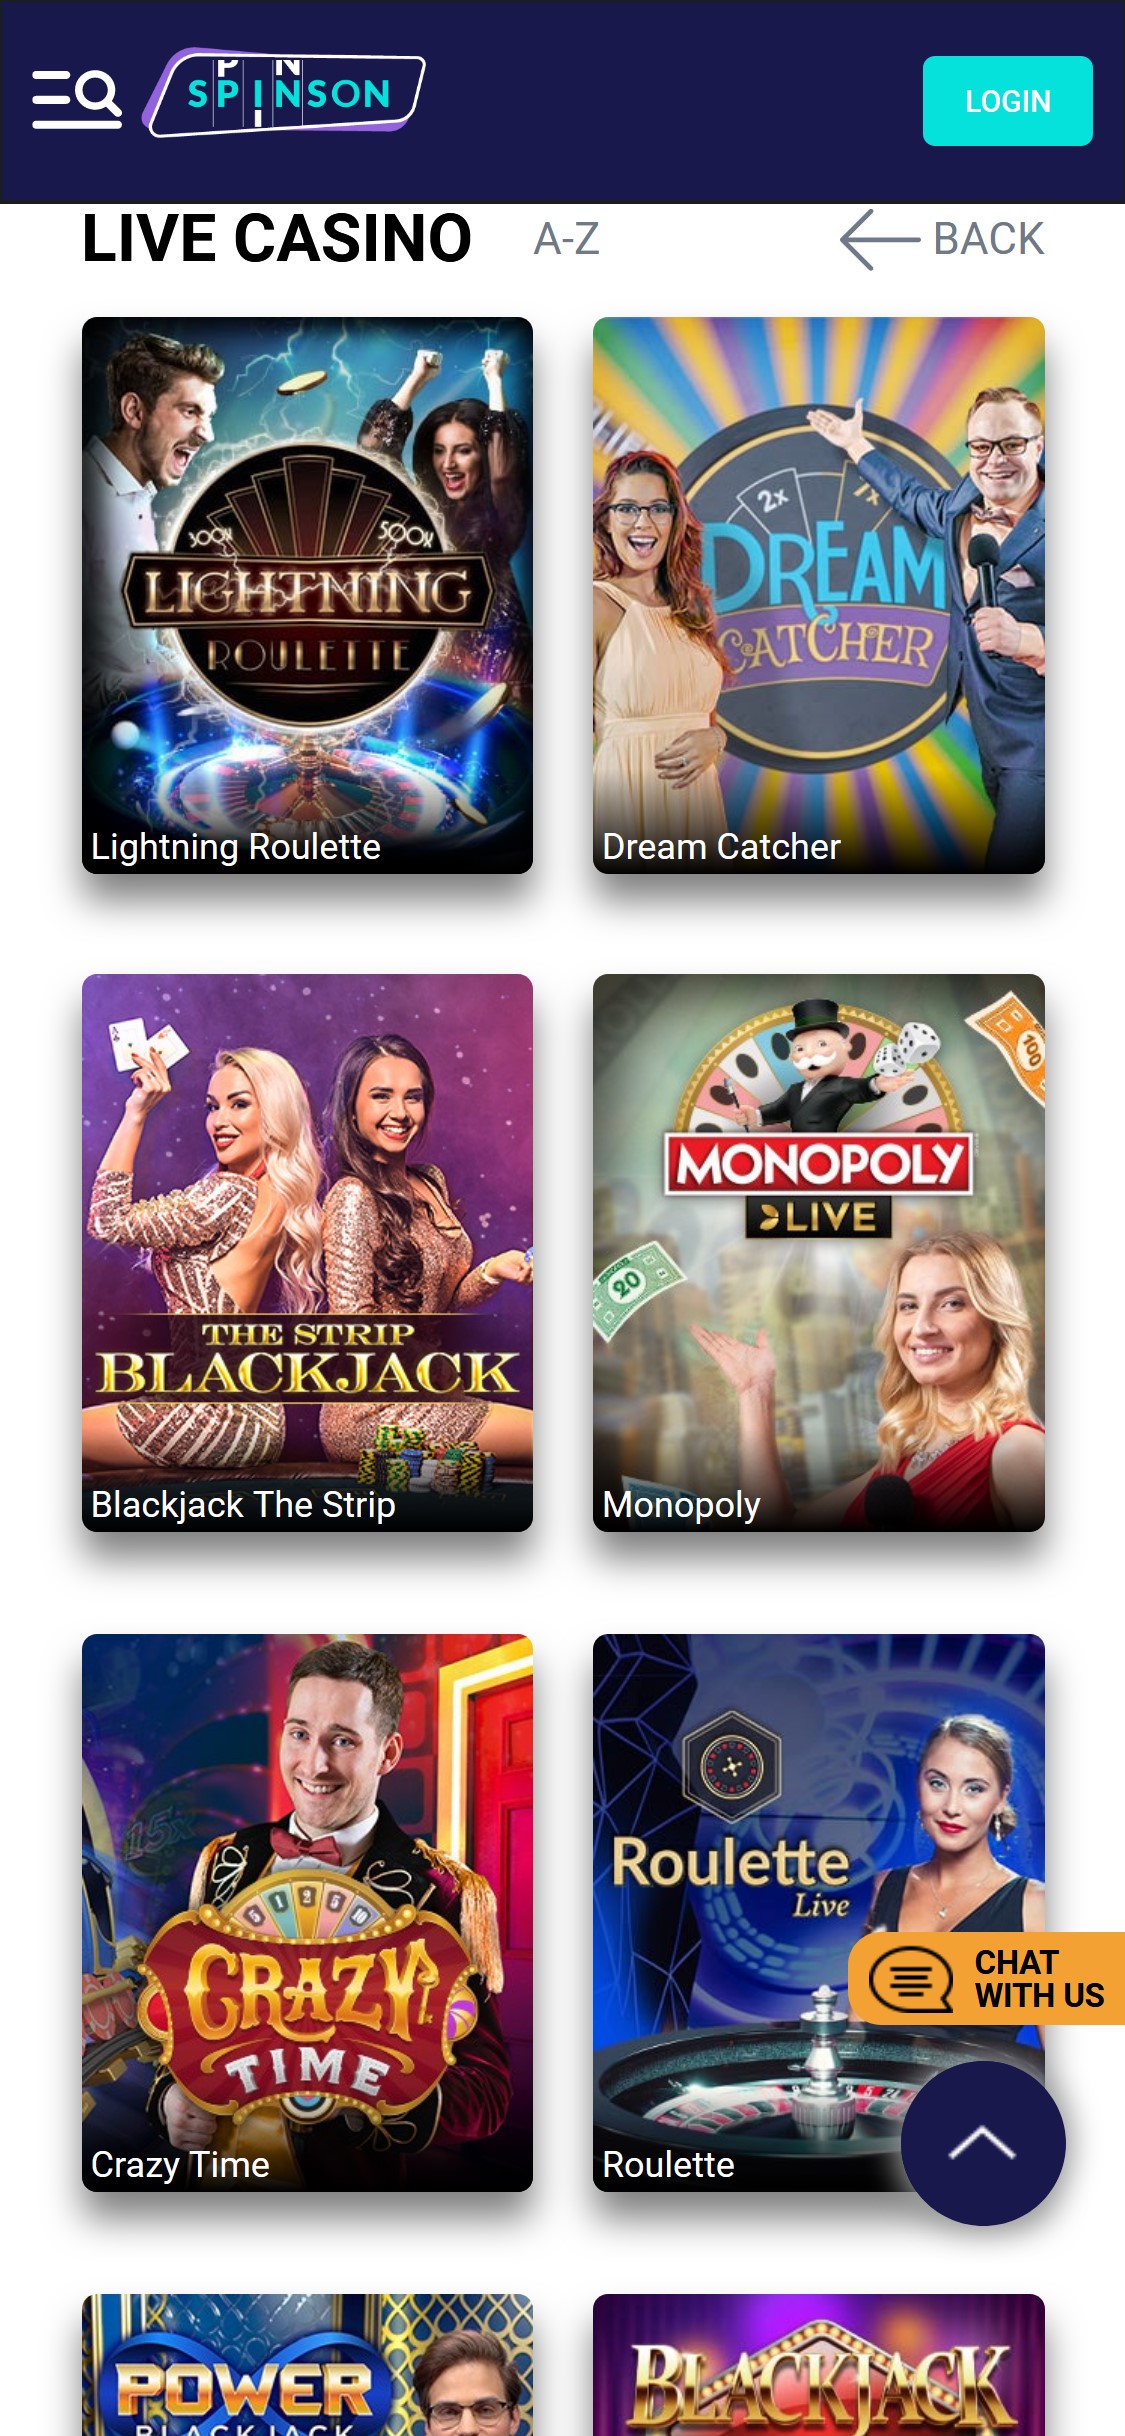 Spinson Casino Mobile Live Dealer Games Review